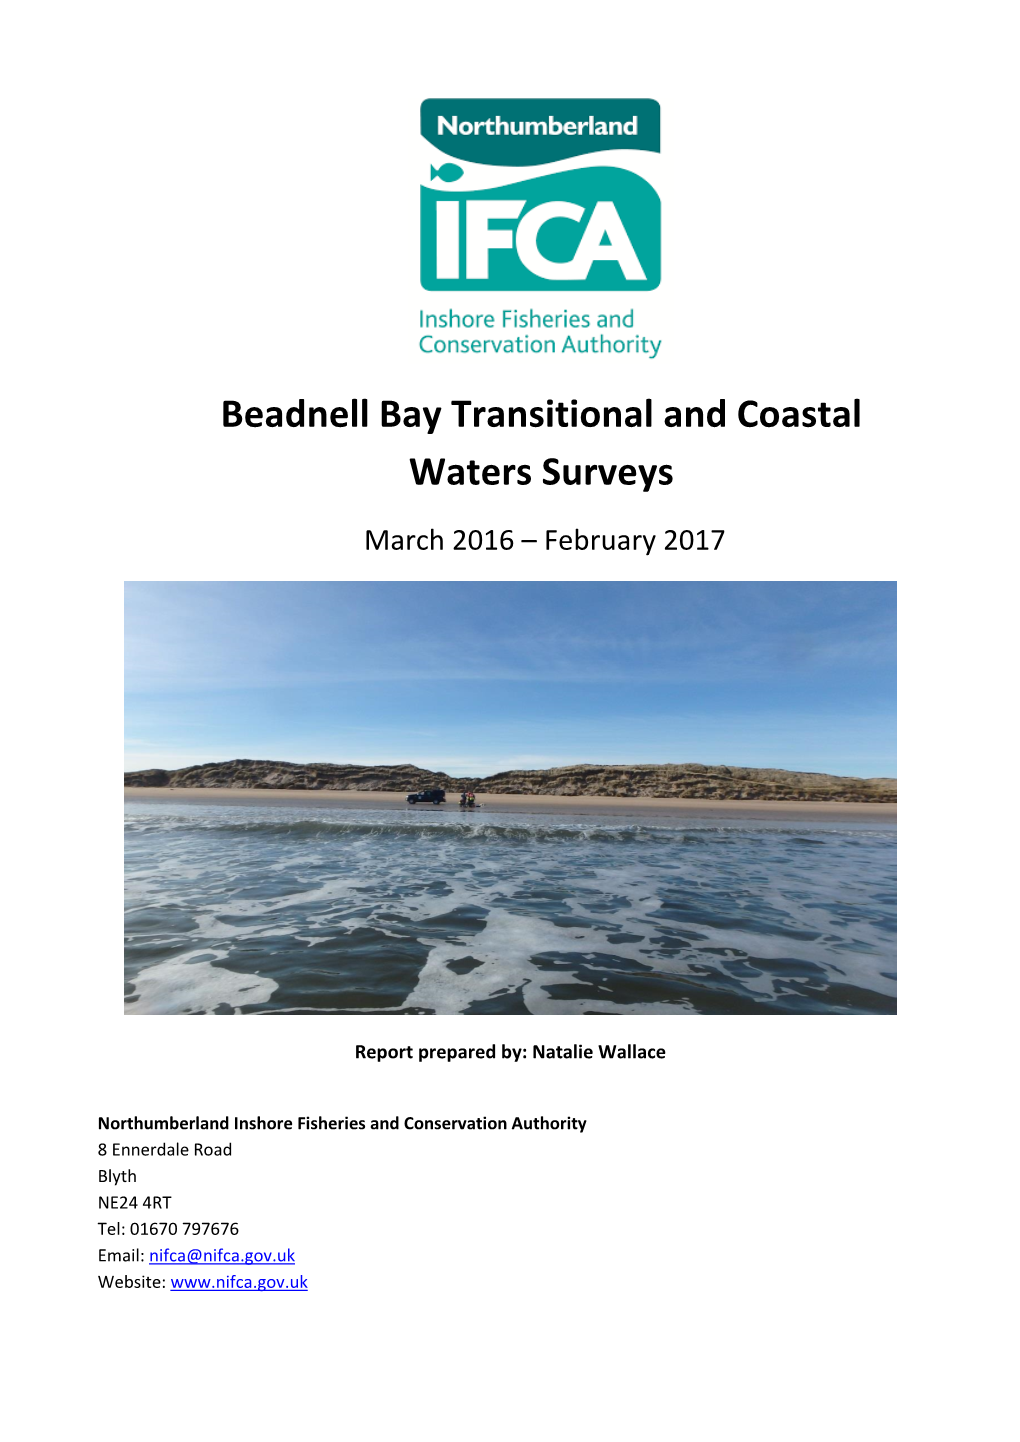 Beadnell Bay Transitional and Coastal Waters Surveys